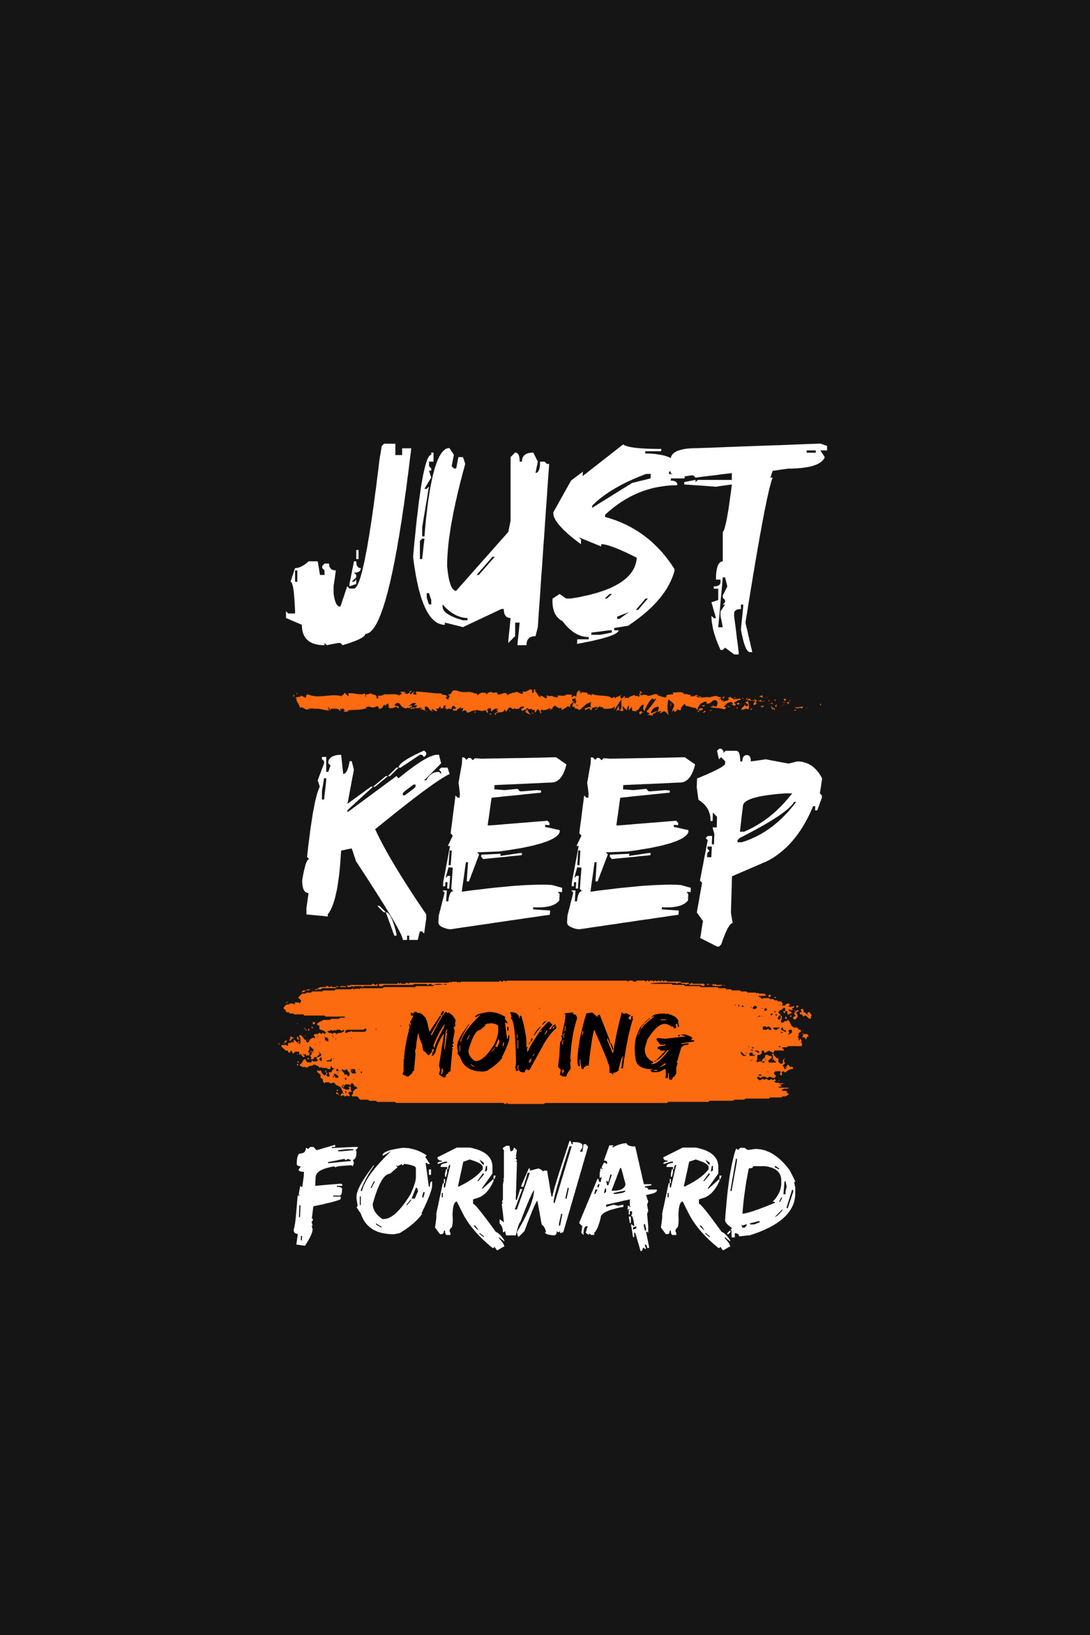 Keep Moving Forward Printed T-Shirt For Men - WowWaves - 1